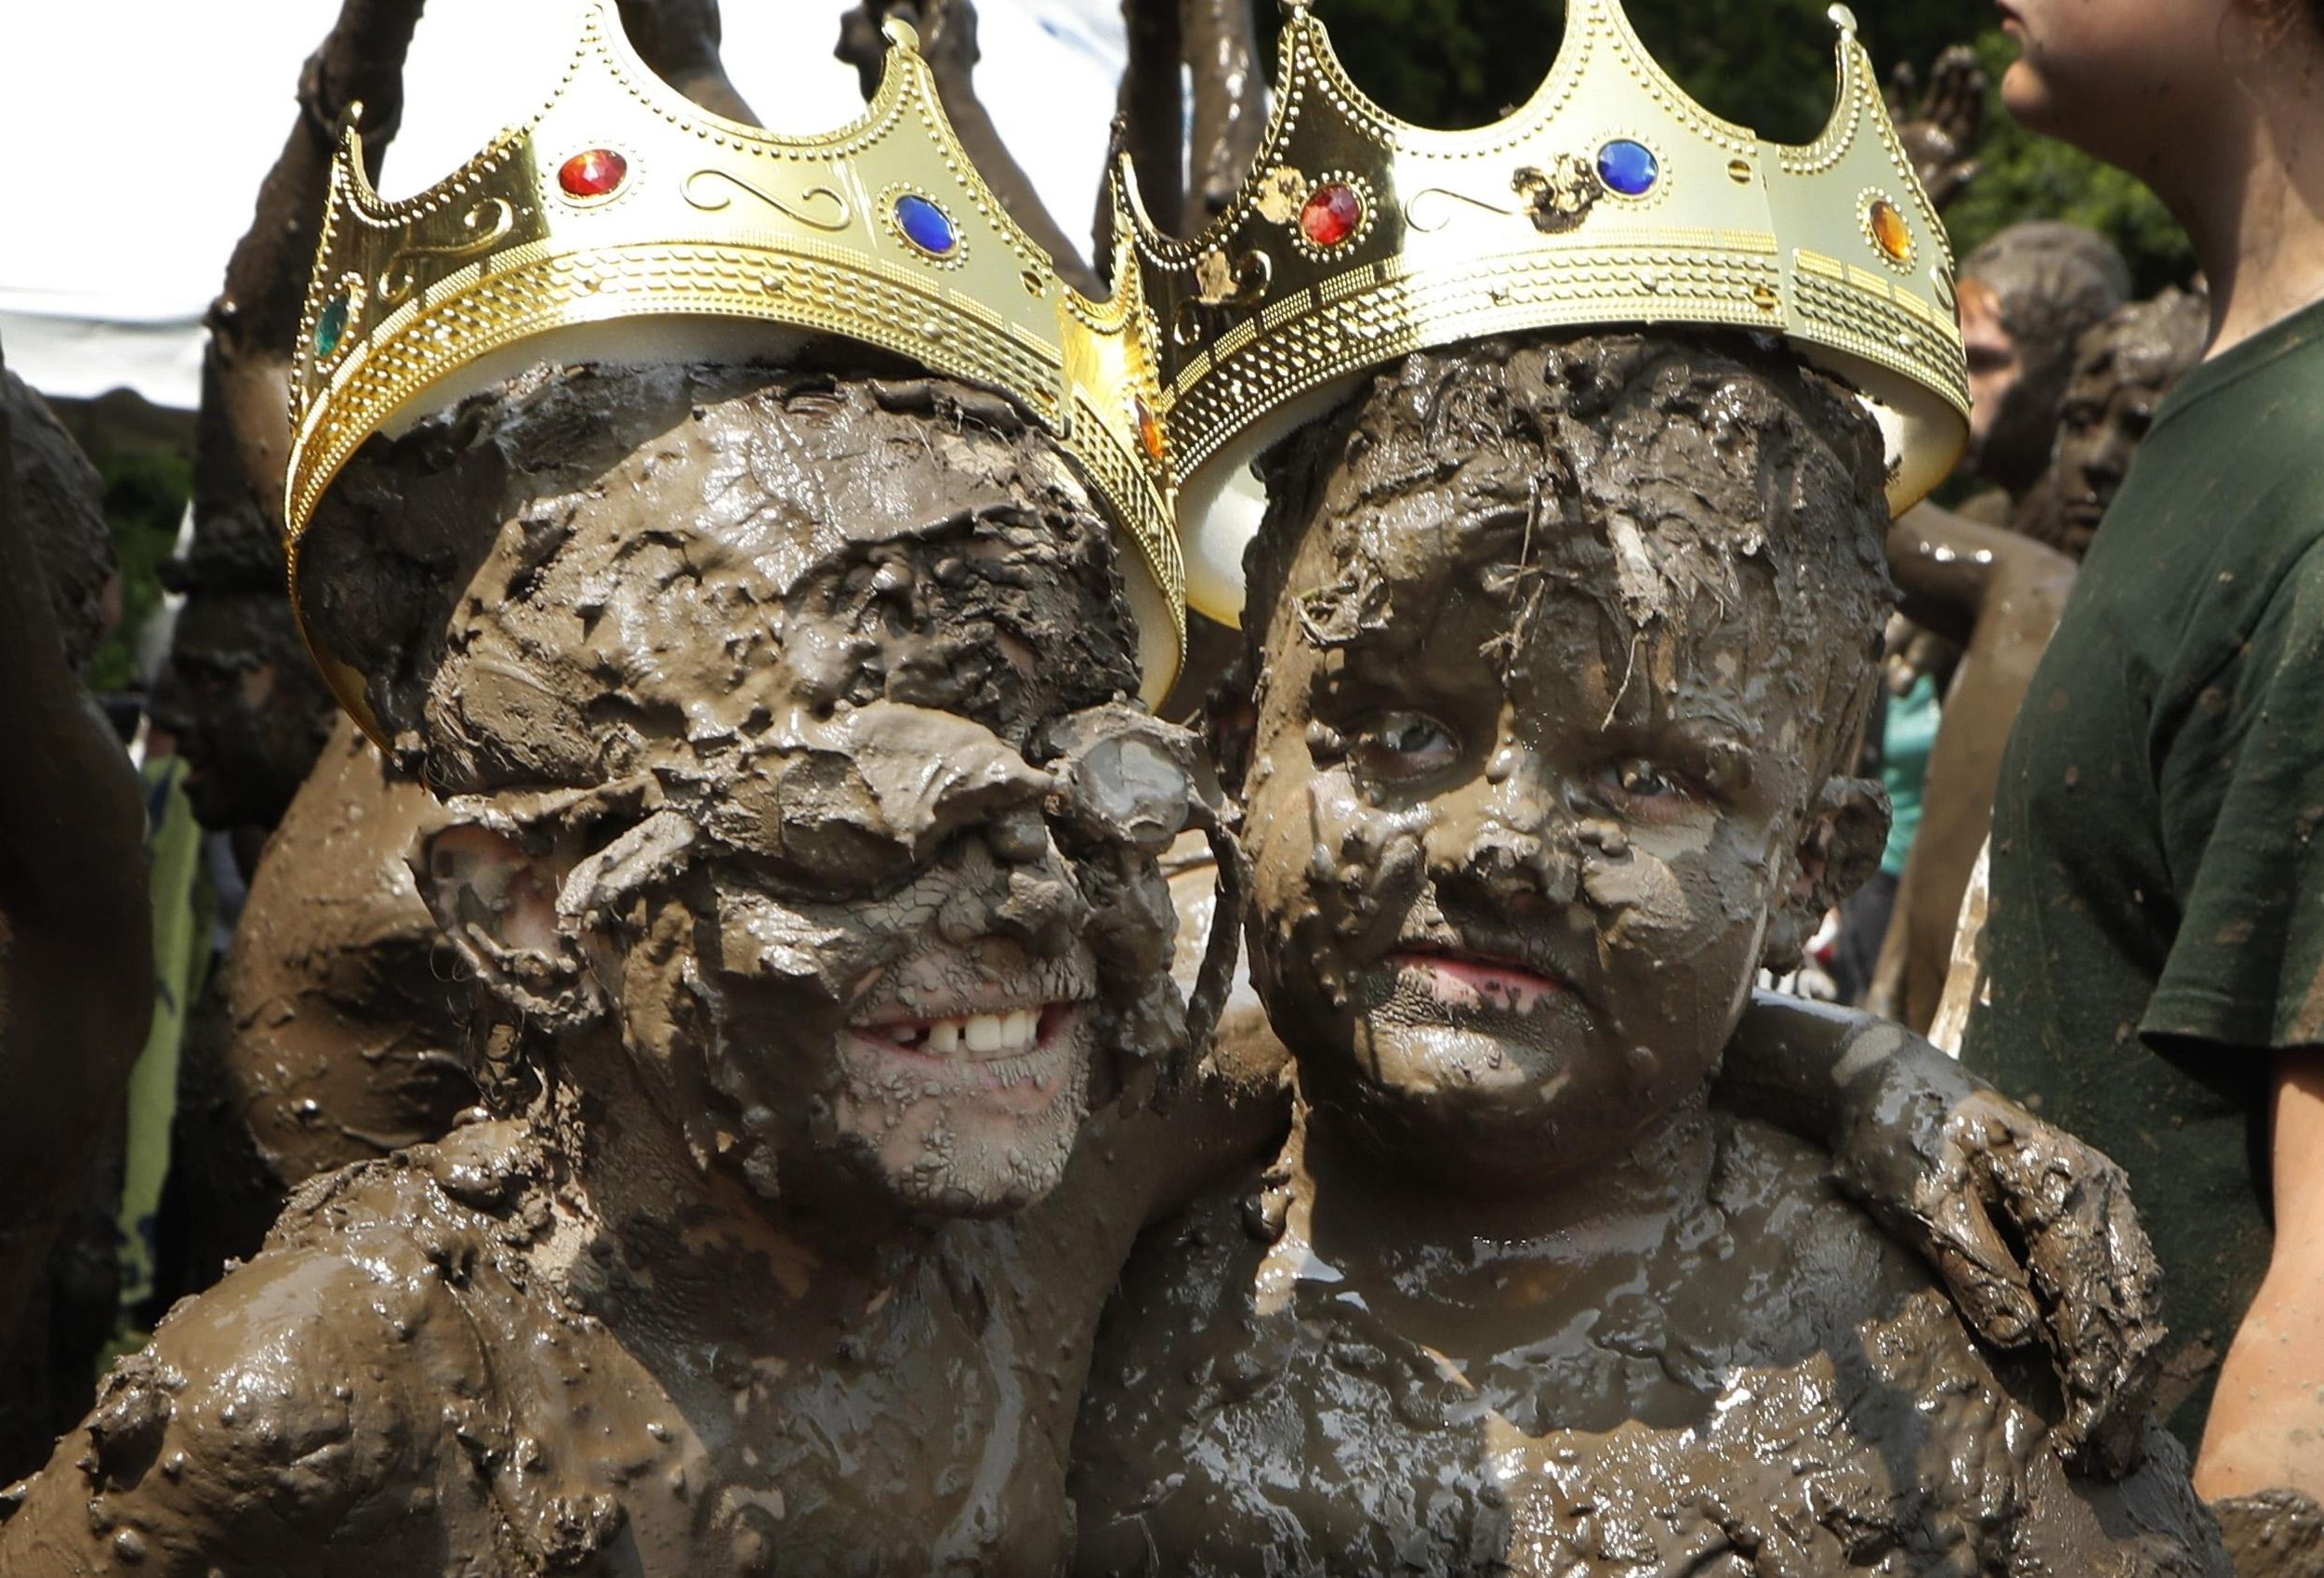 Mud Day in Michigan July 9, 2019 The SpokesmanReview